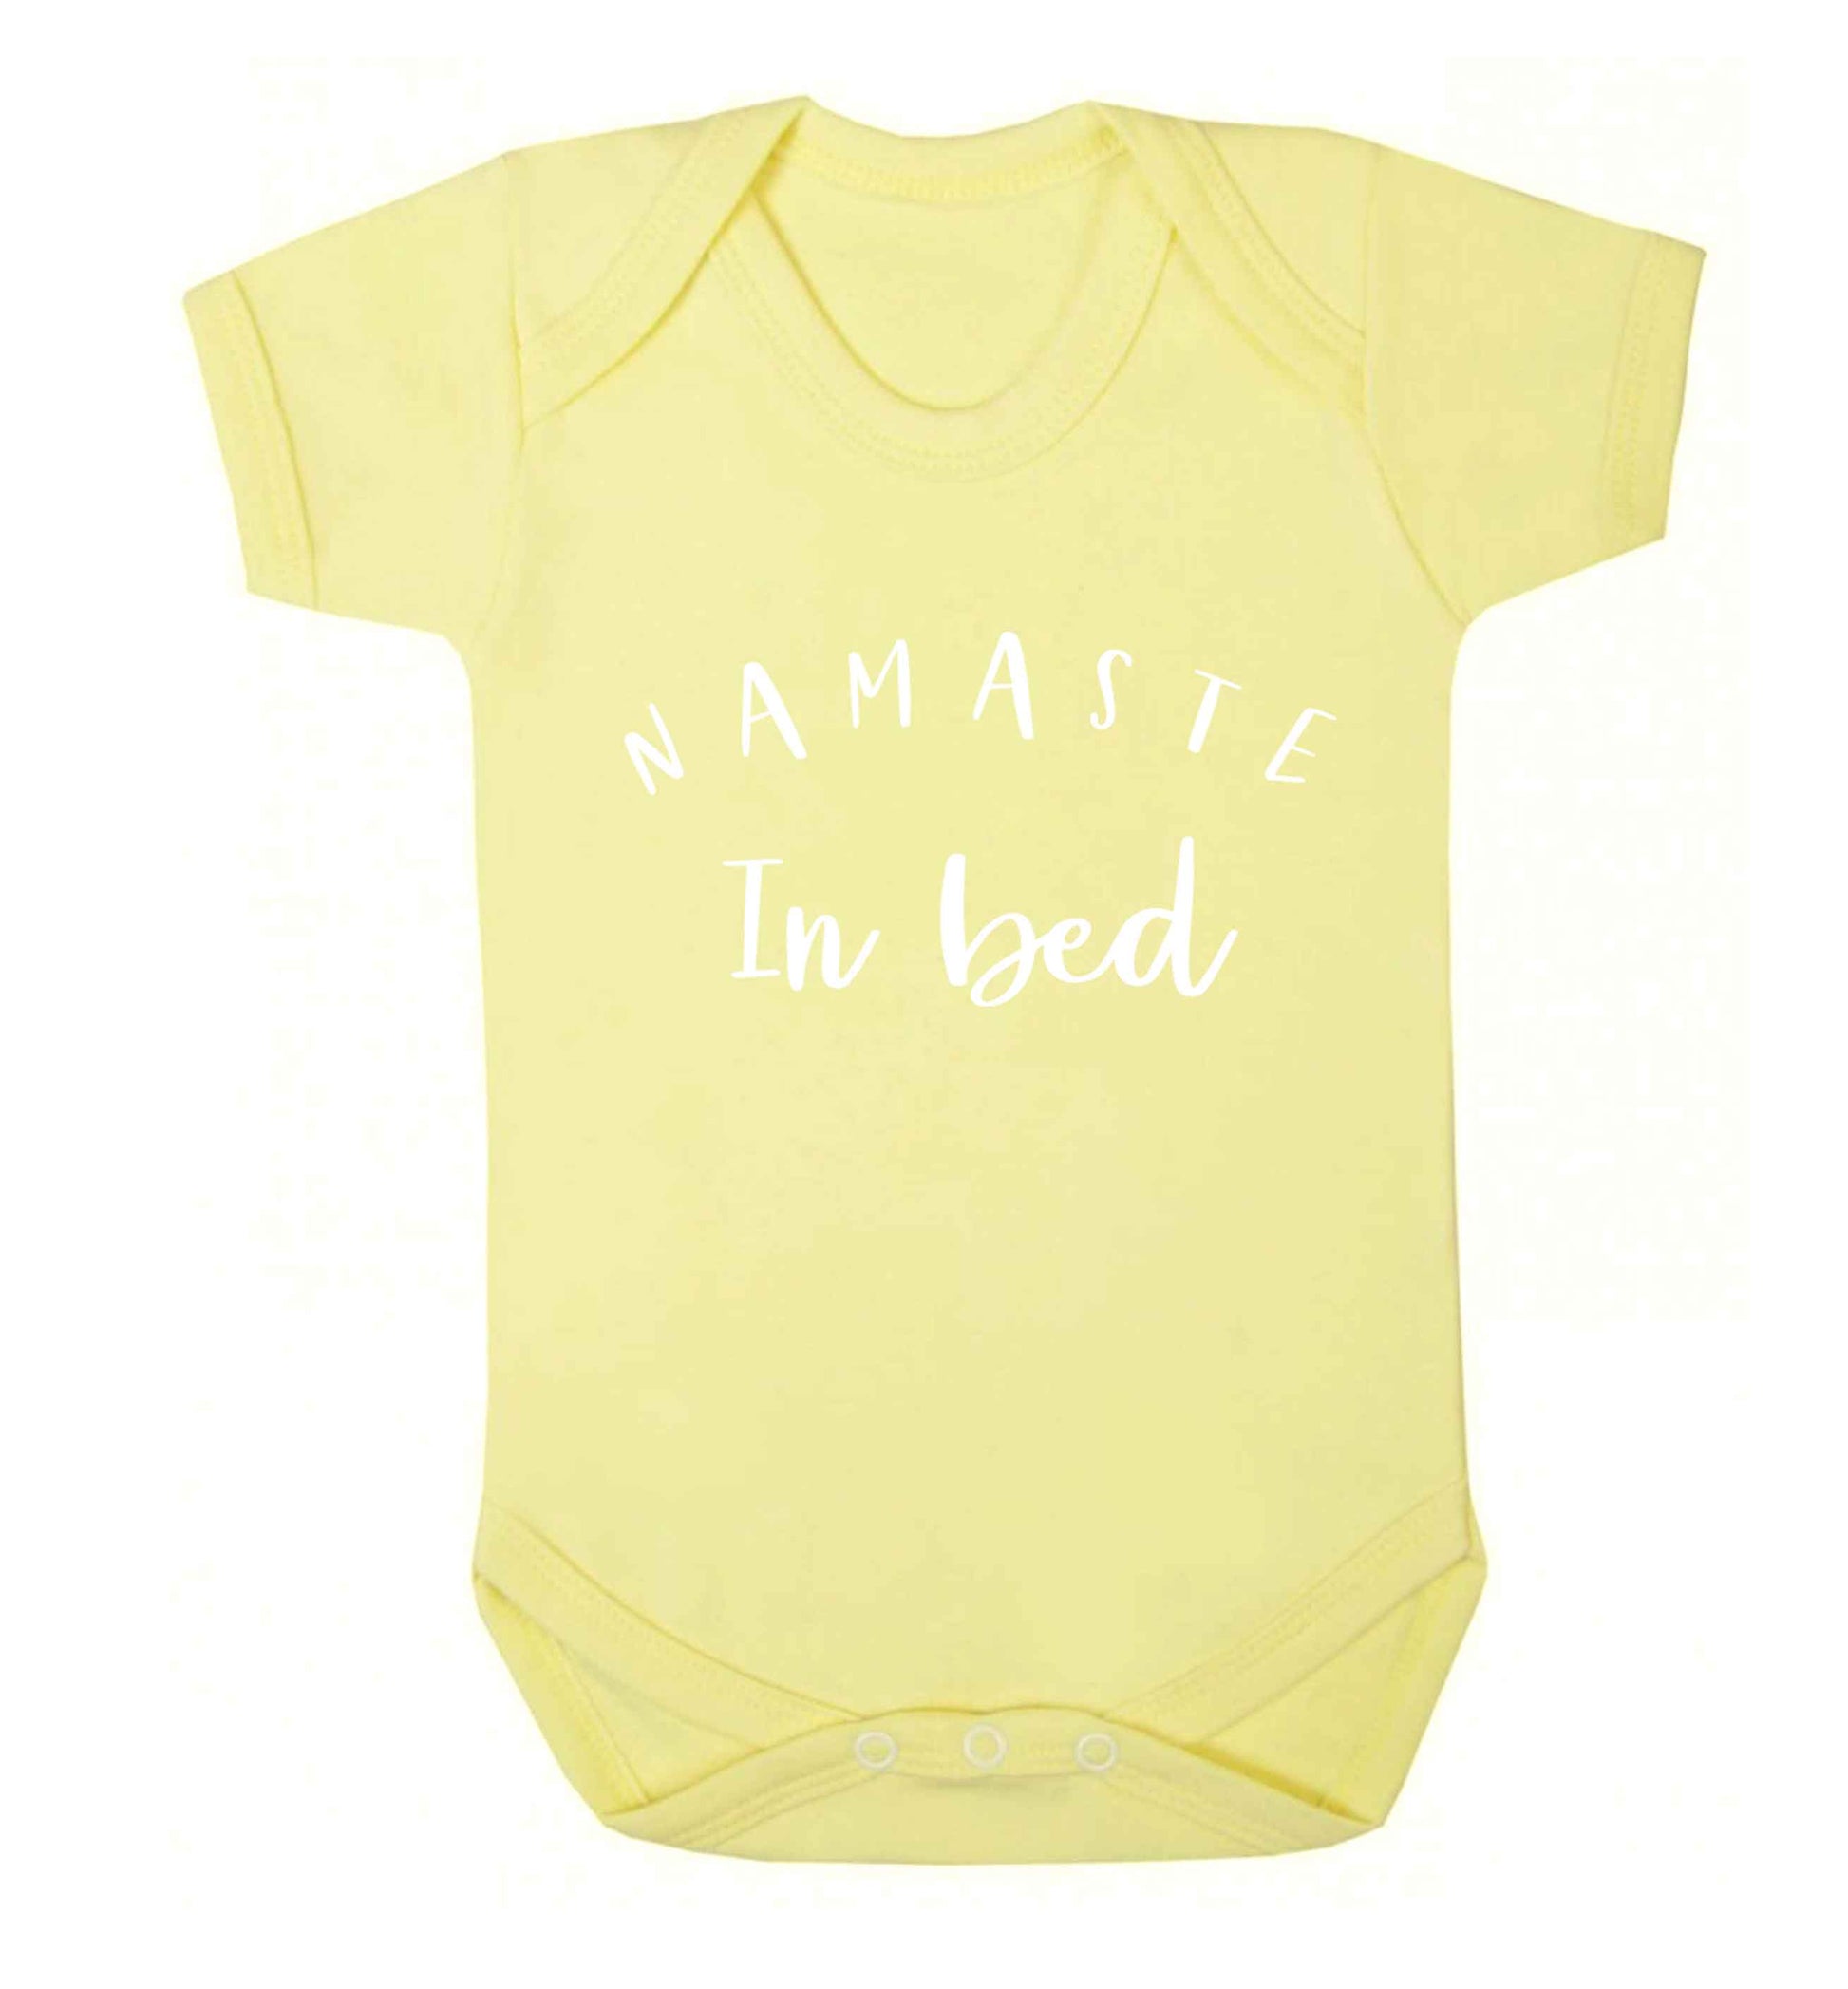 Namaste in bed Baby Vest pale yellow 18-24 months